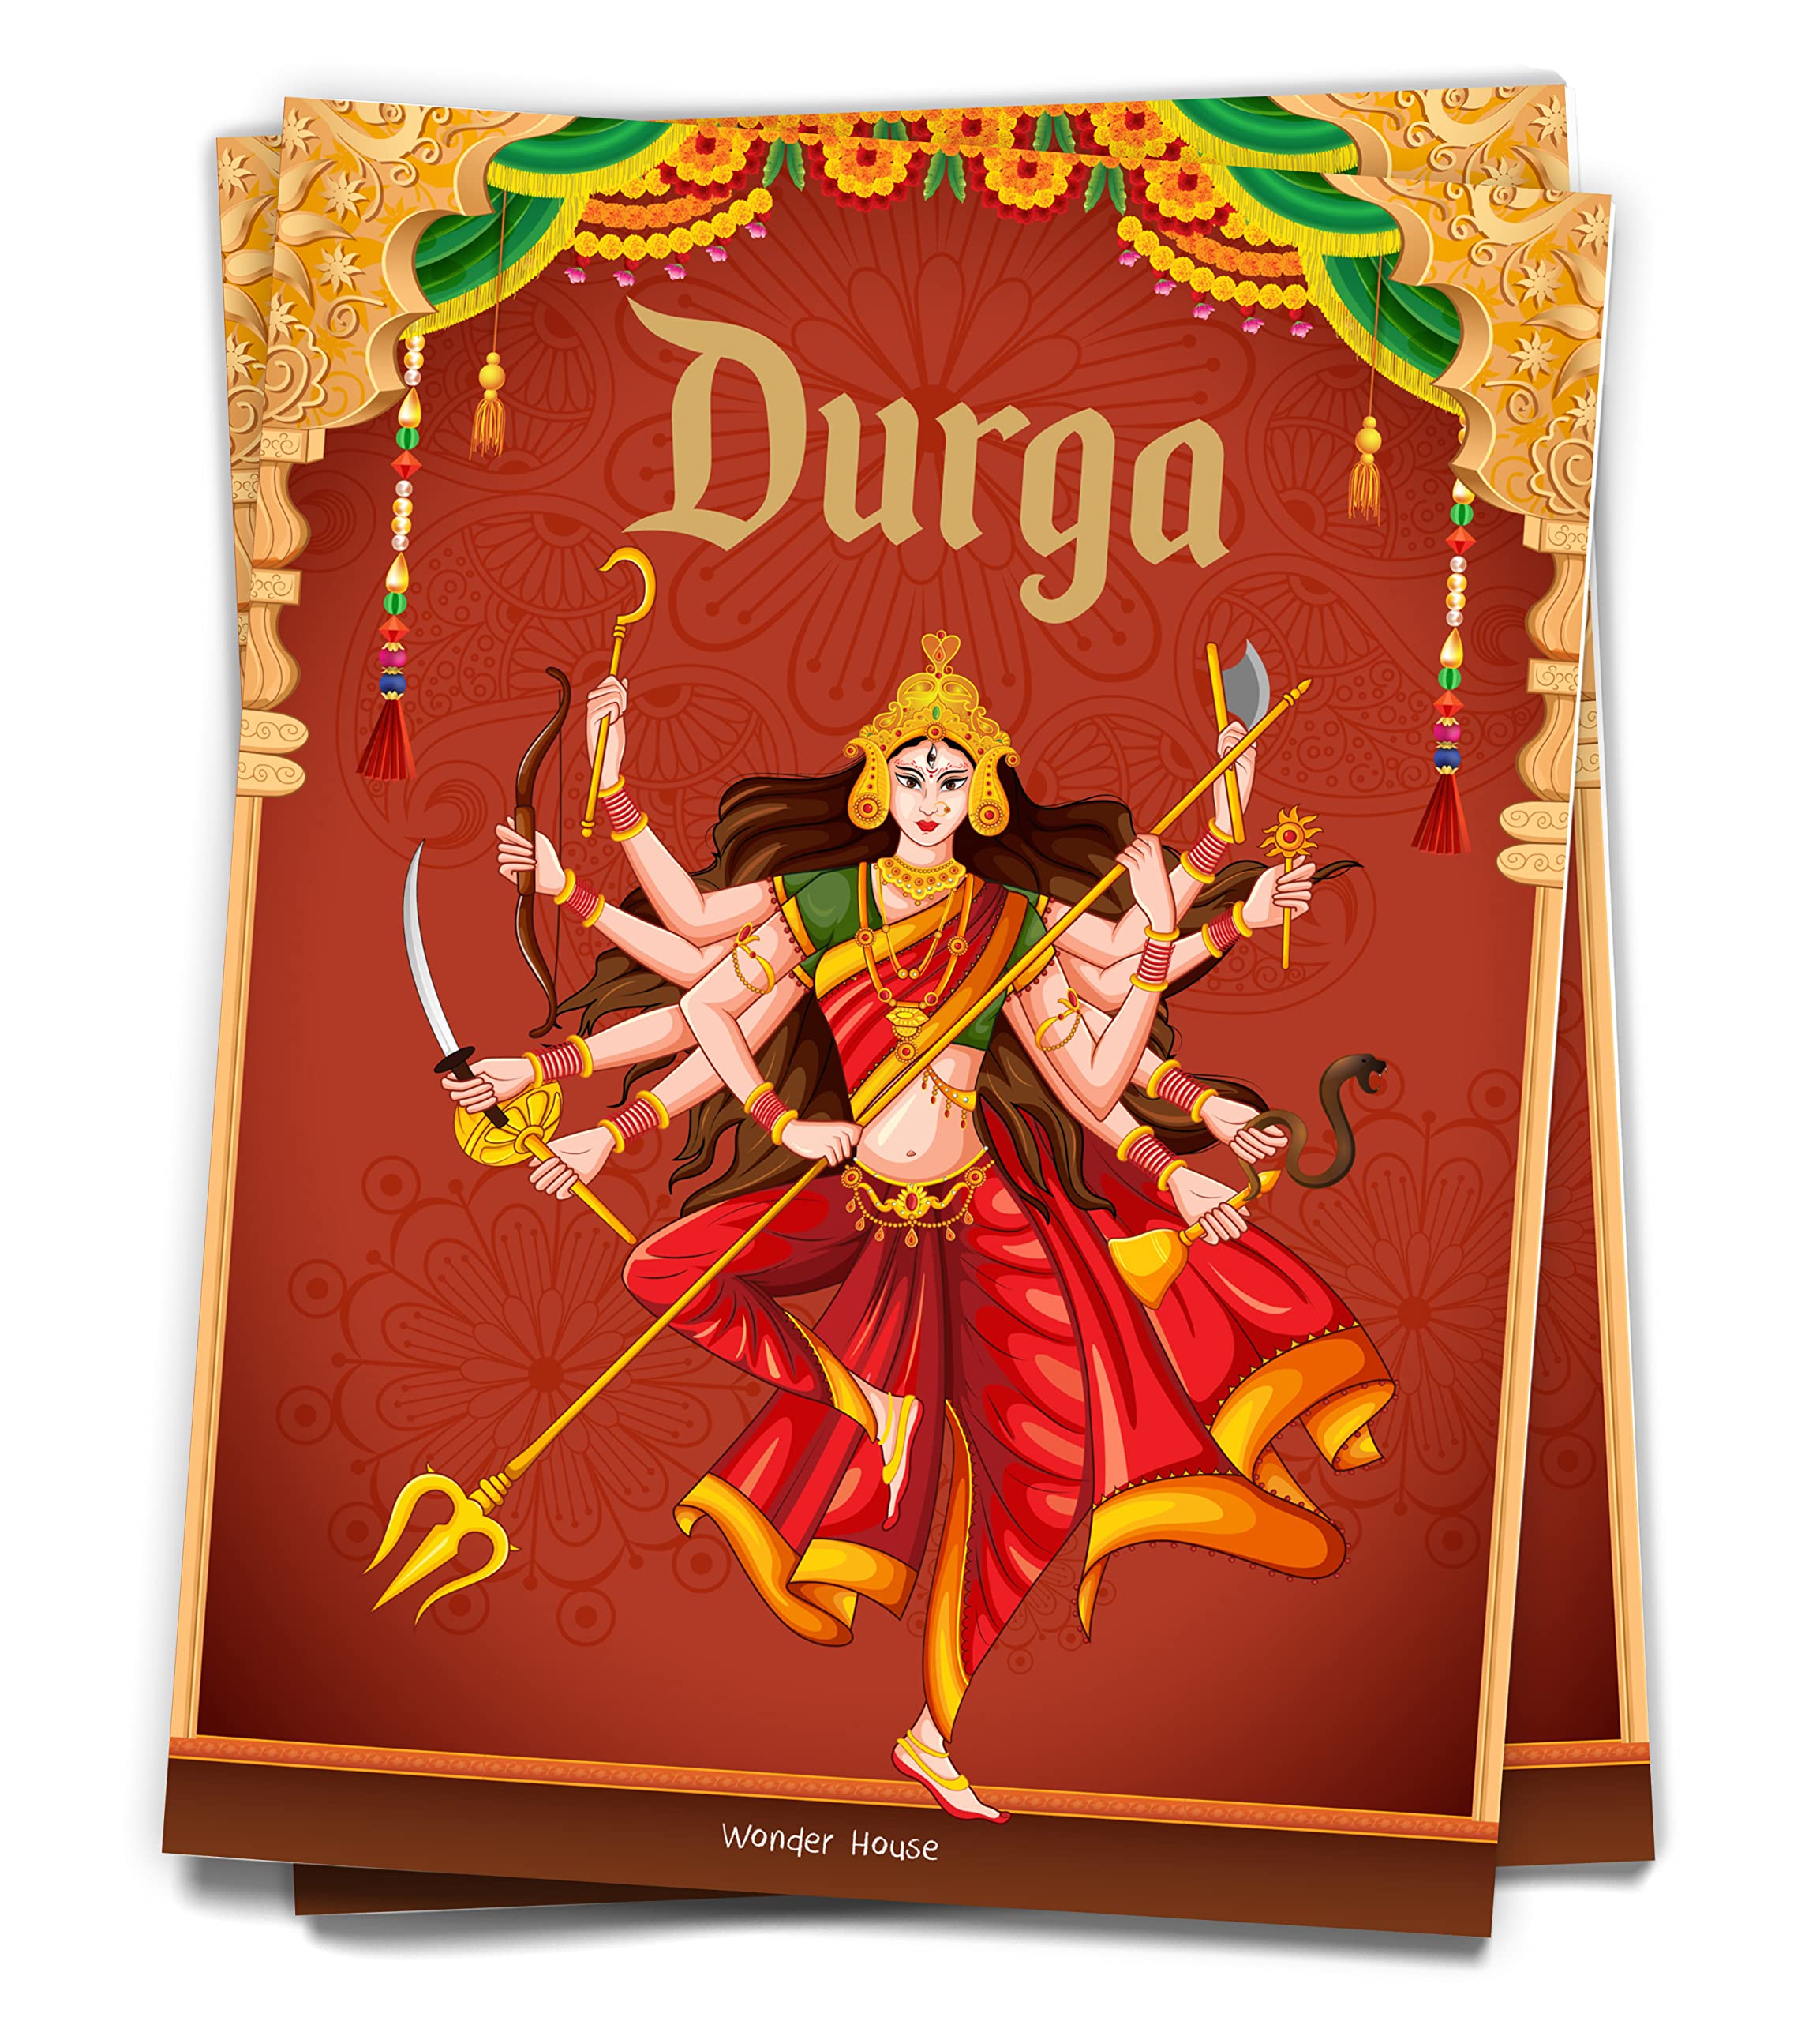 Tales from Durga (Indian Mythology for Children)